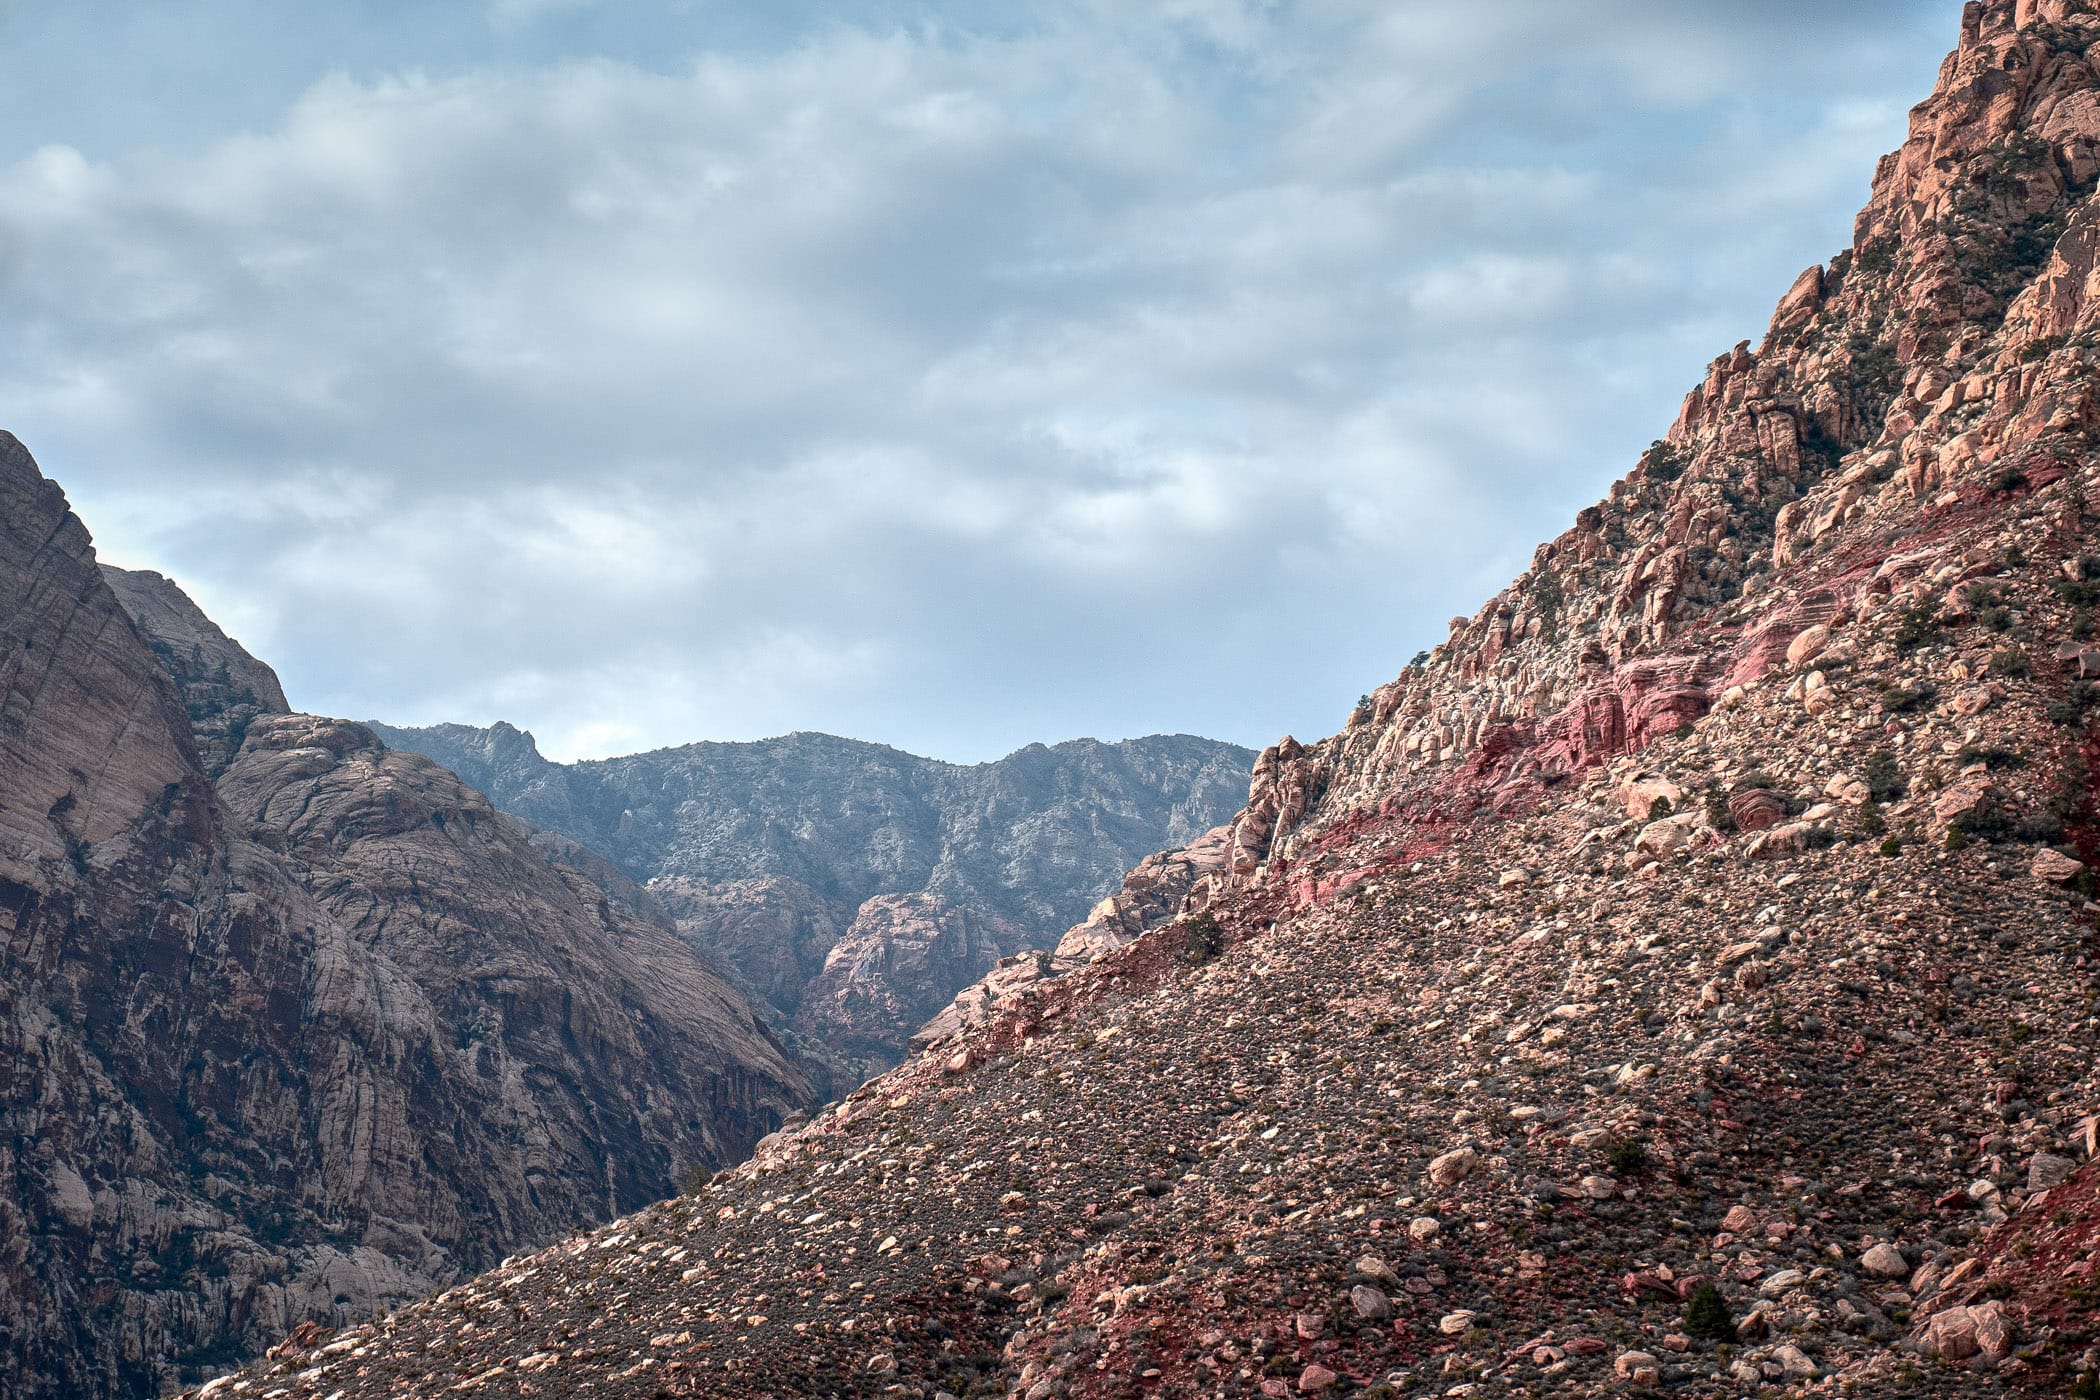 The rock-strewn, rugged landscape of Nevada's Spring Mountains.